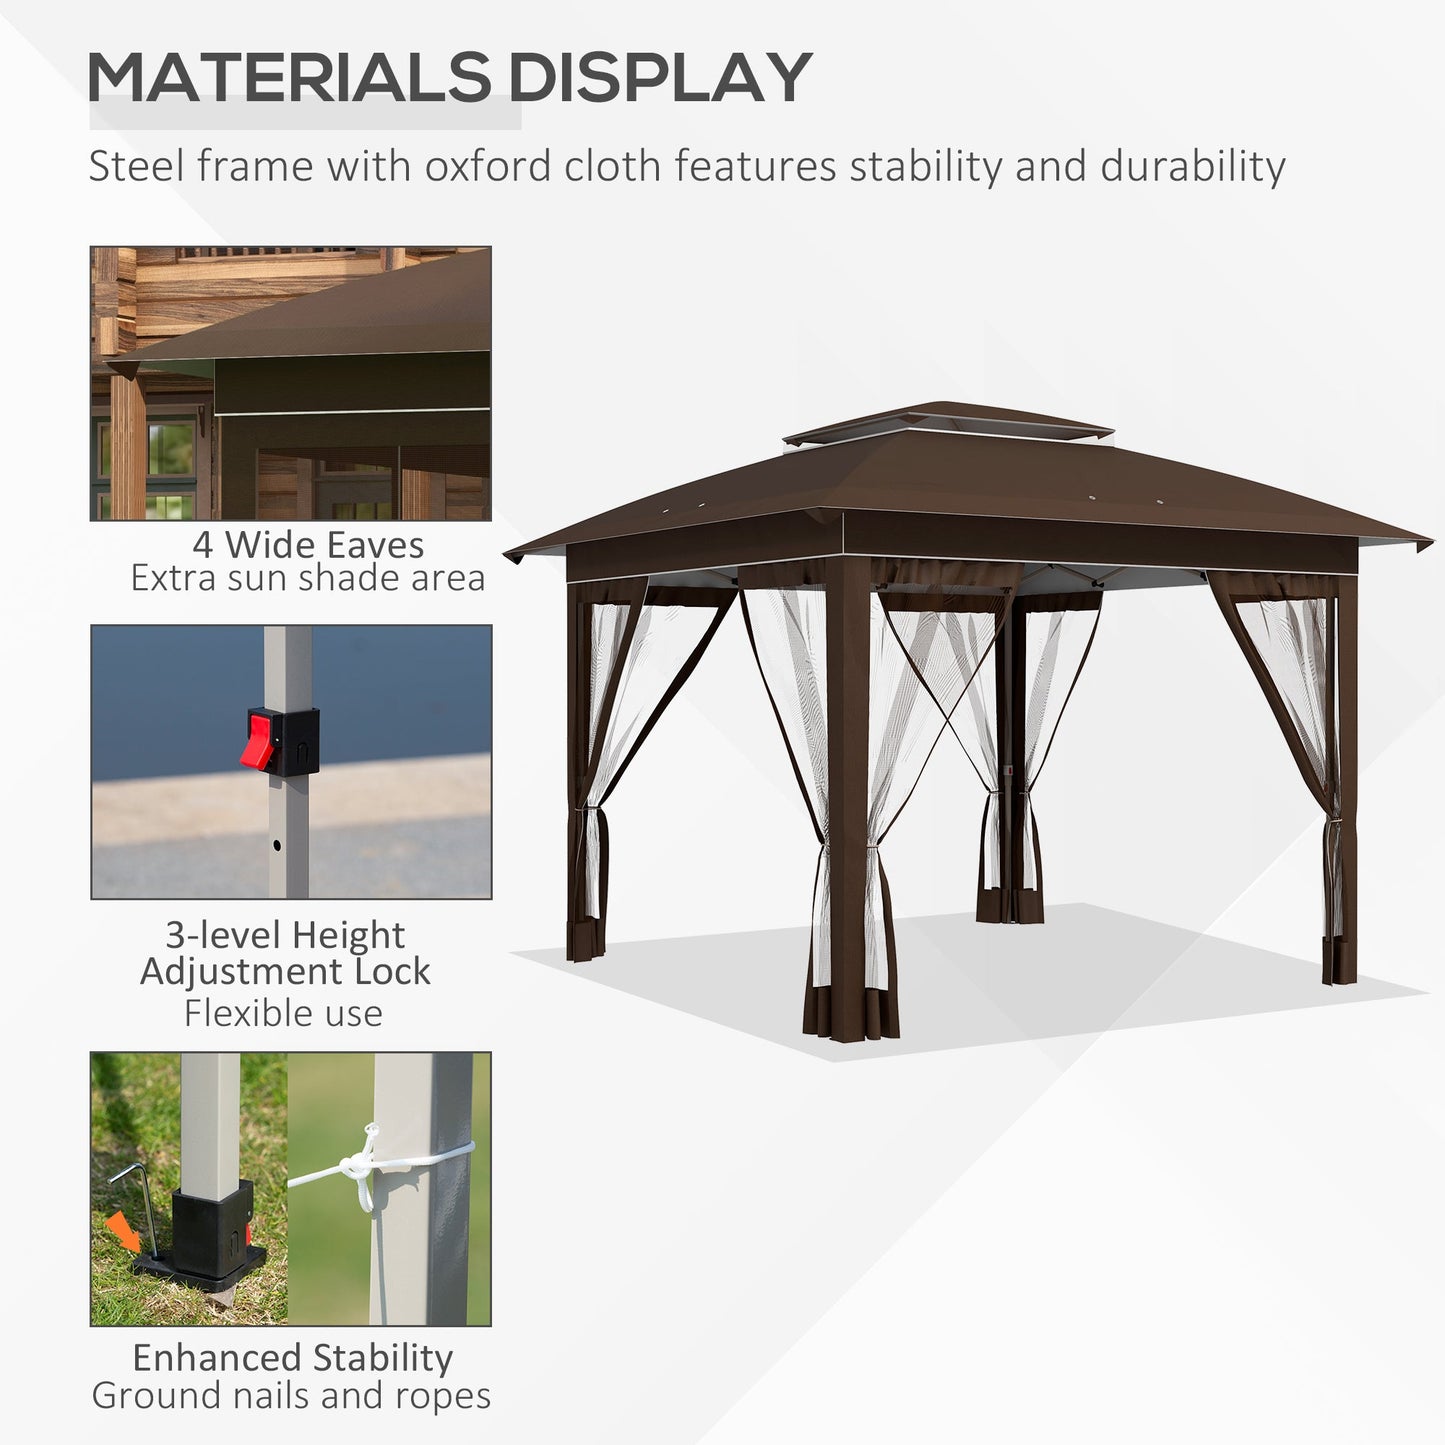 -Outsunny 12' x 12' Pop Up Canopy Tent with Netting and Carry Bag, Instant Sun Shelter with 137 sq.ft Shade, Dark Brown - Outdoor Style Company